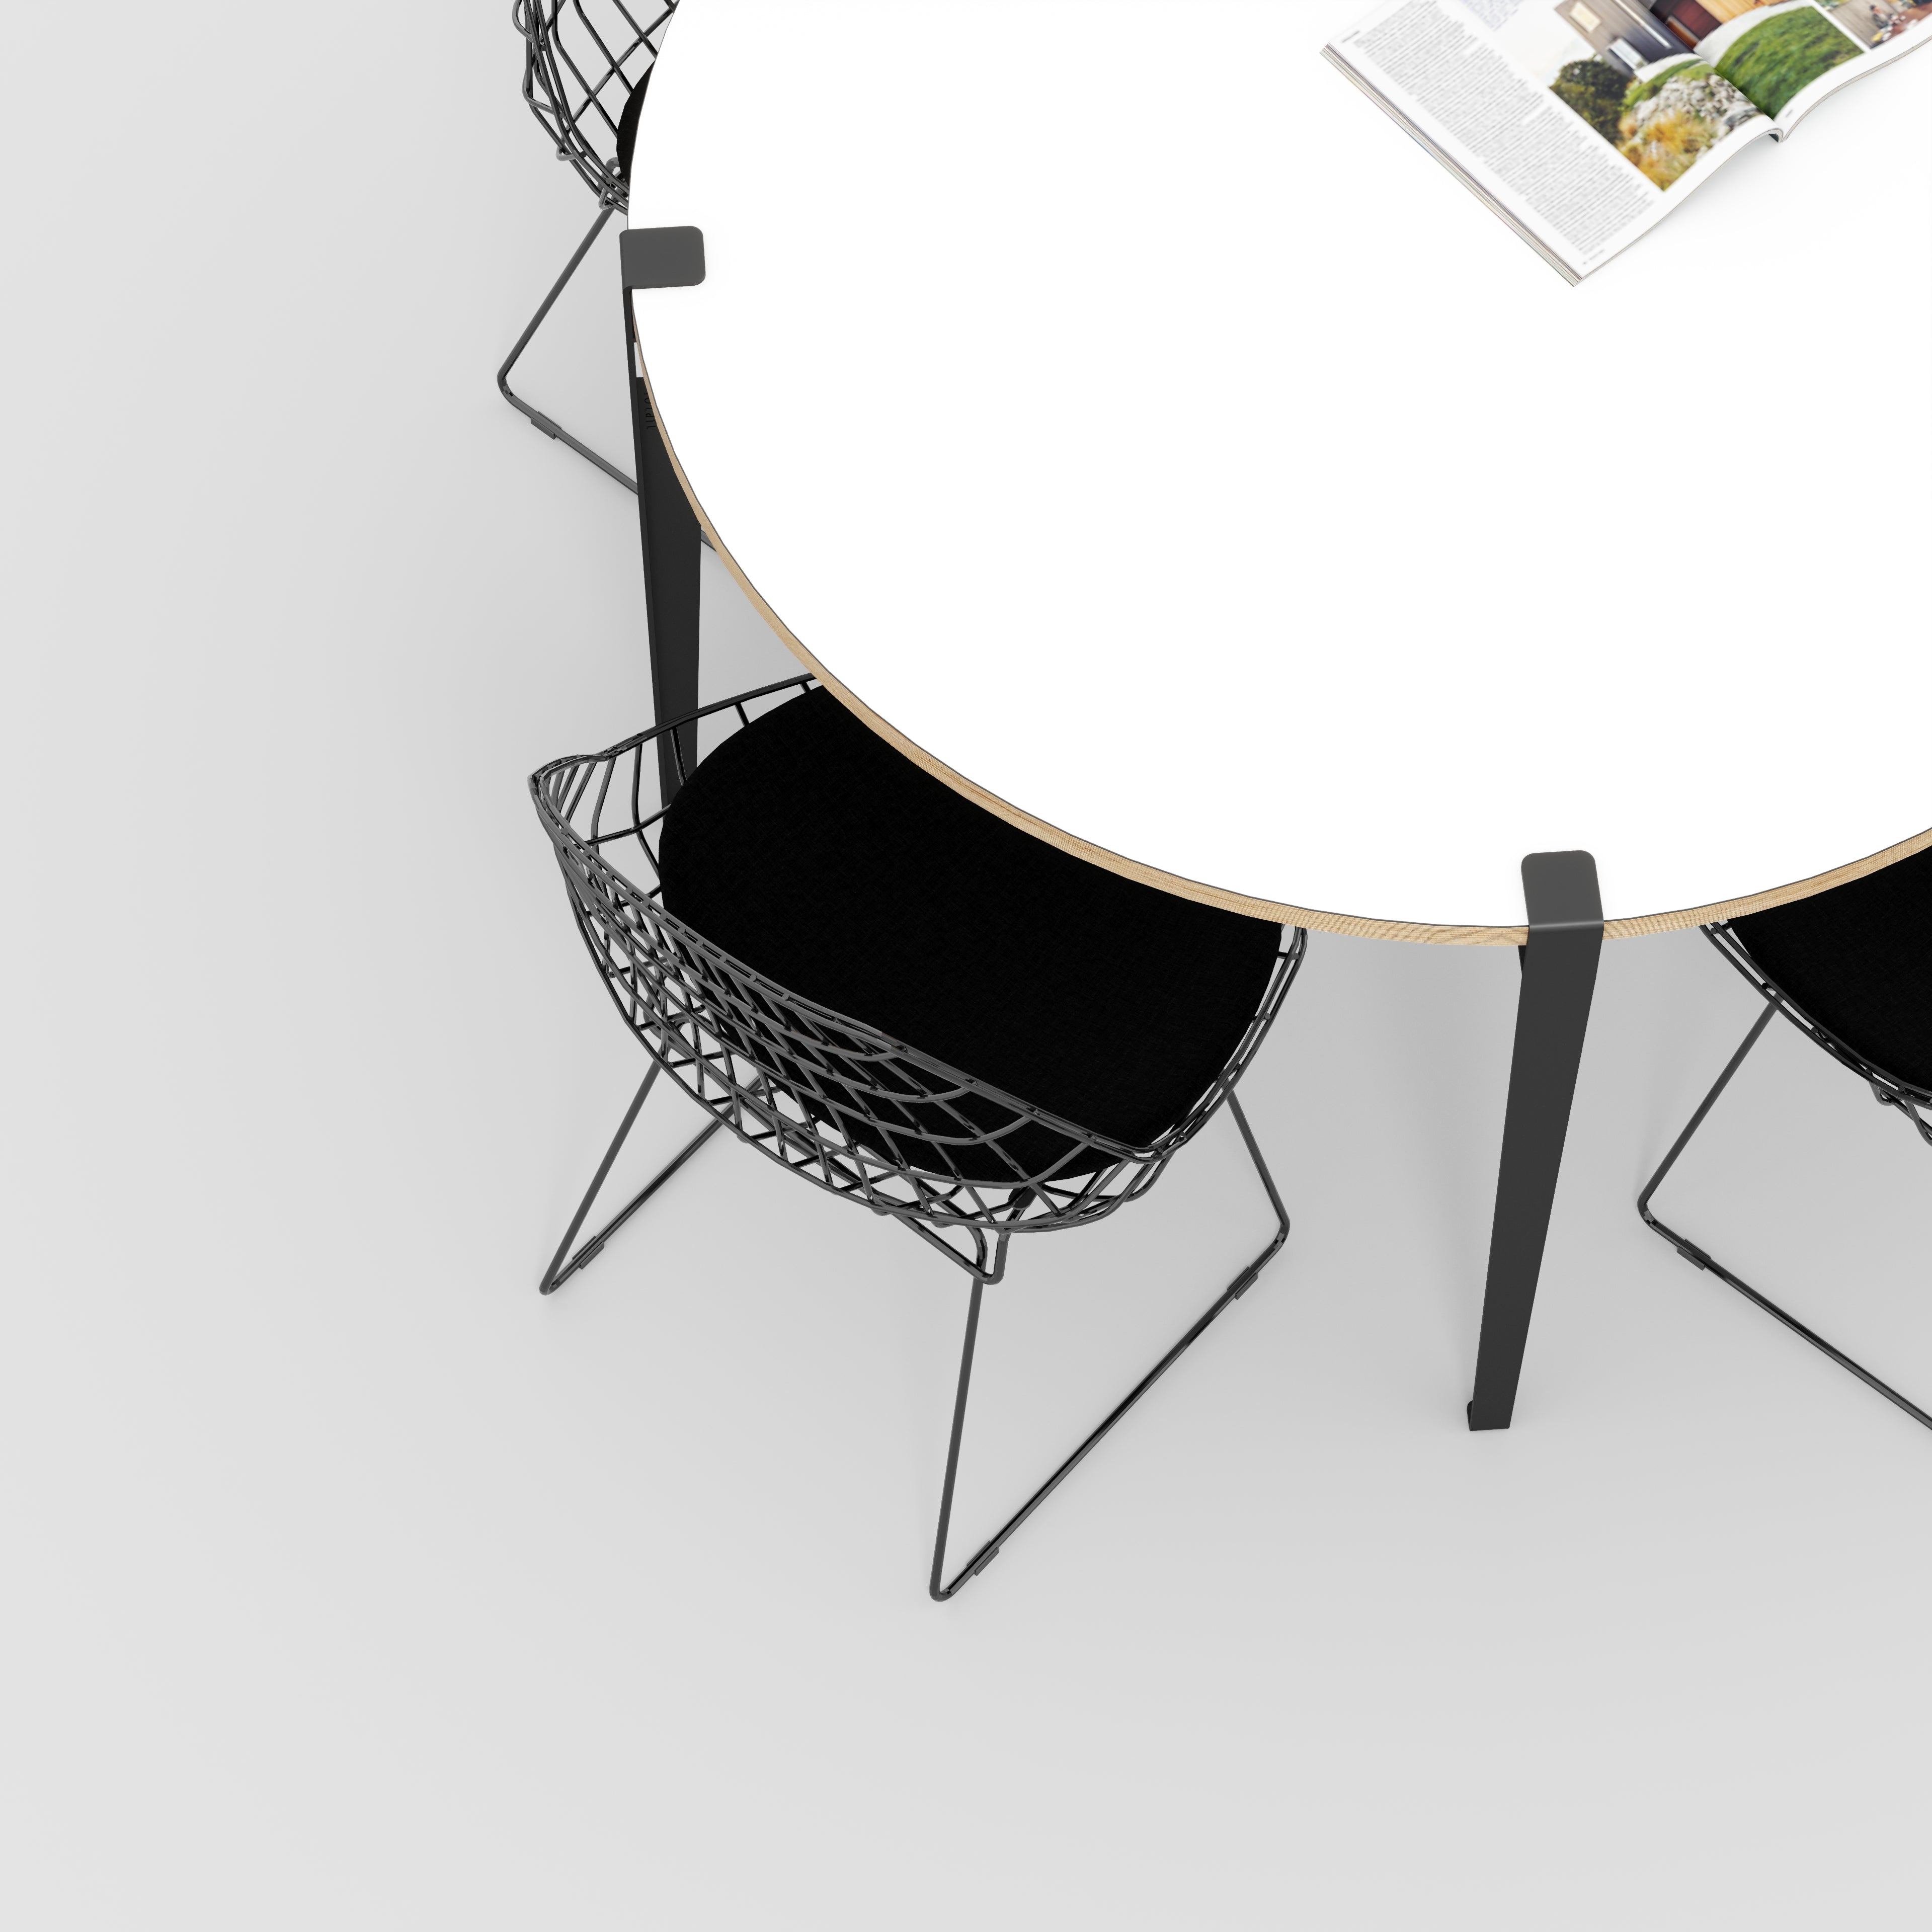 Round Table with Black Tiptoe Legs - Formica White - 1200(dia) x 750(h)